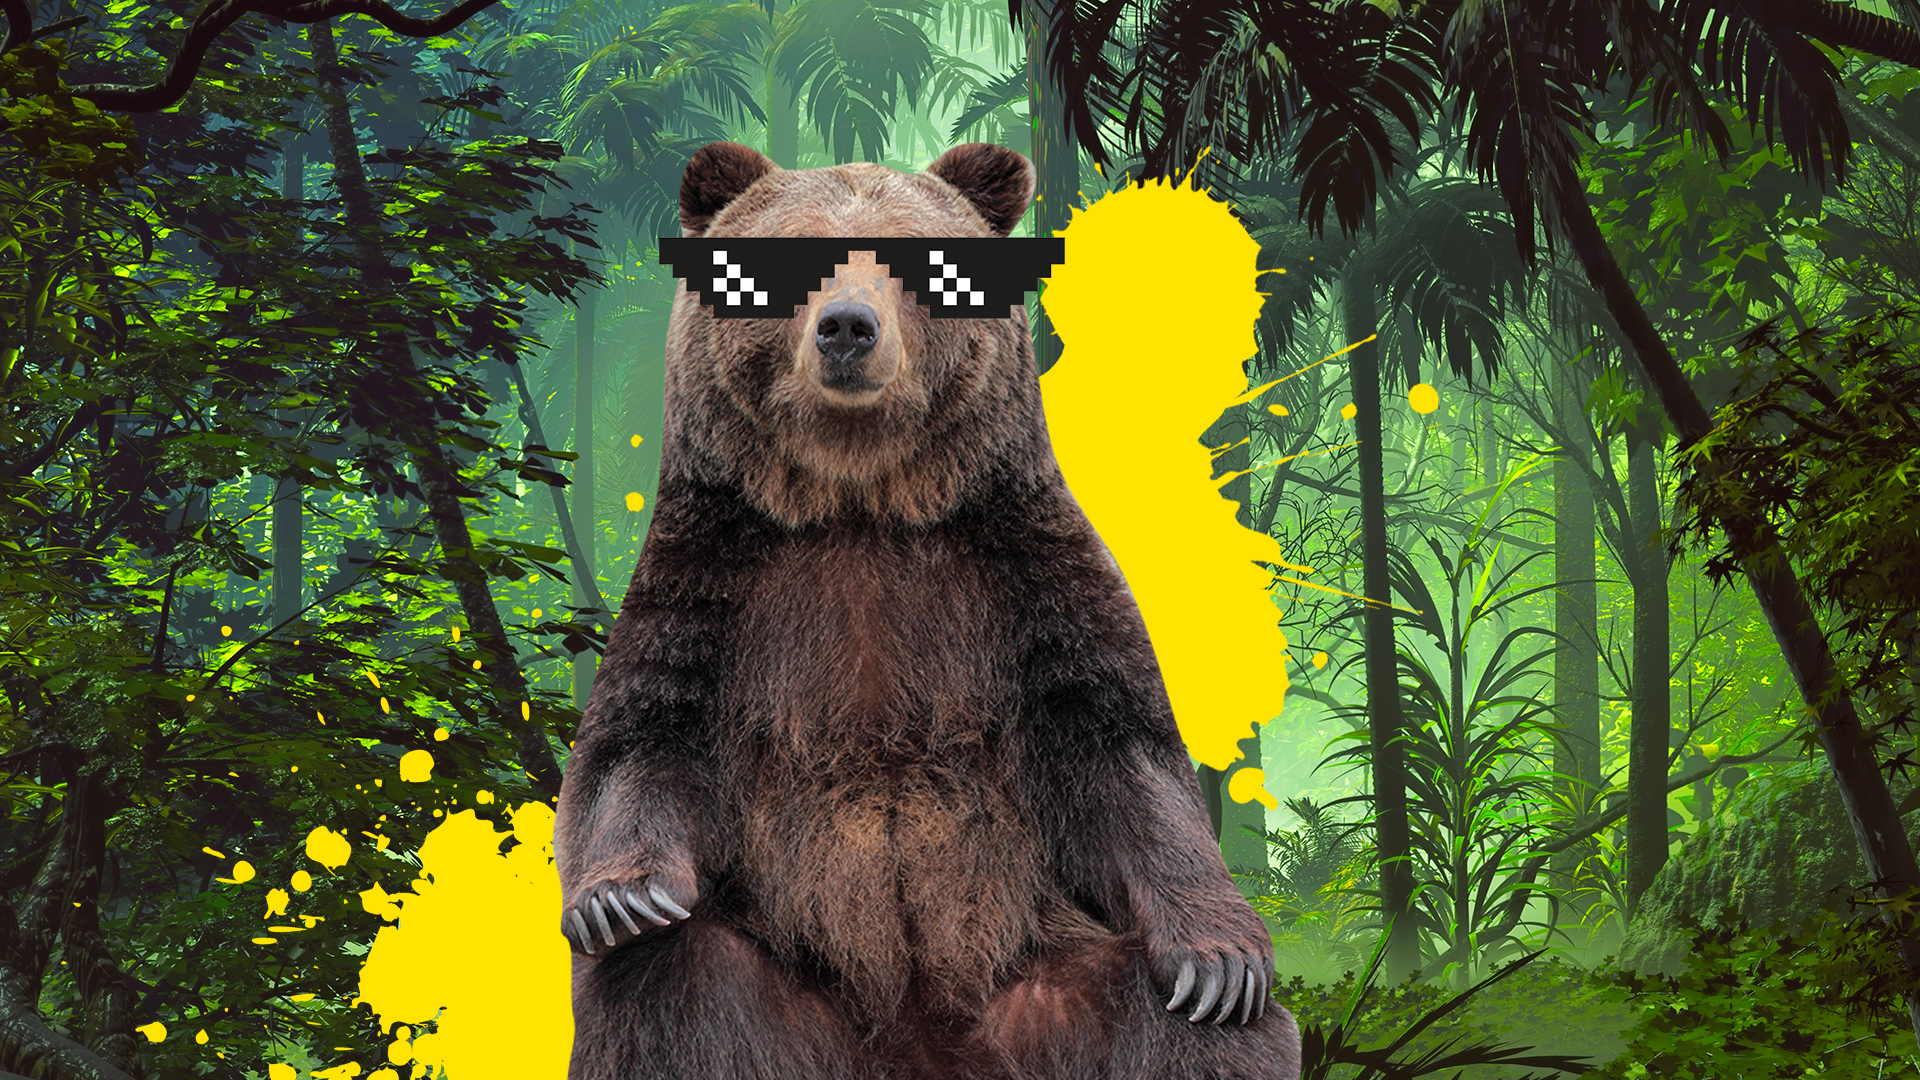 A bear looking cool with sunglasses